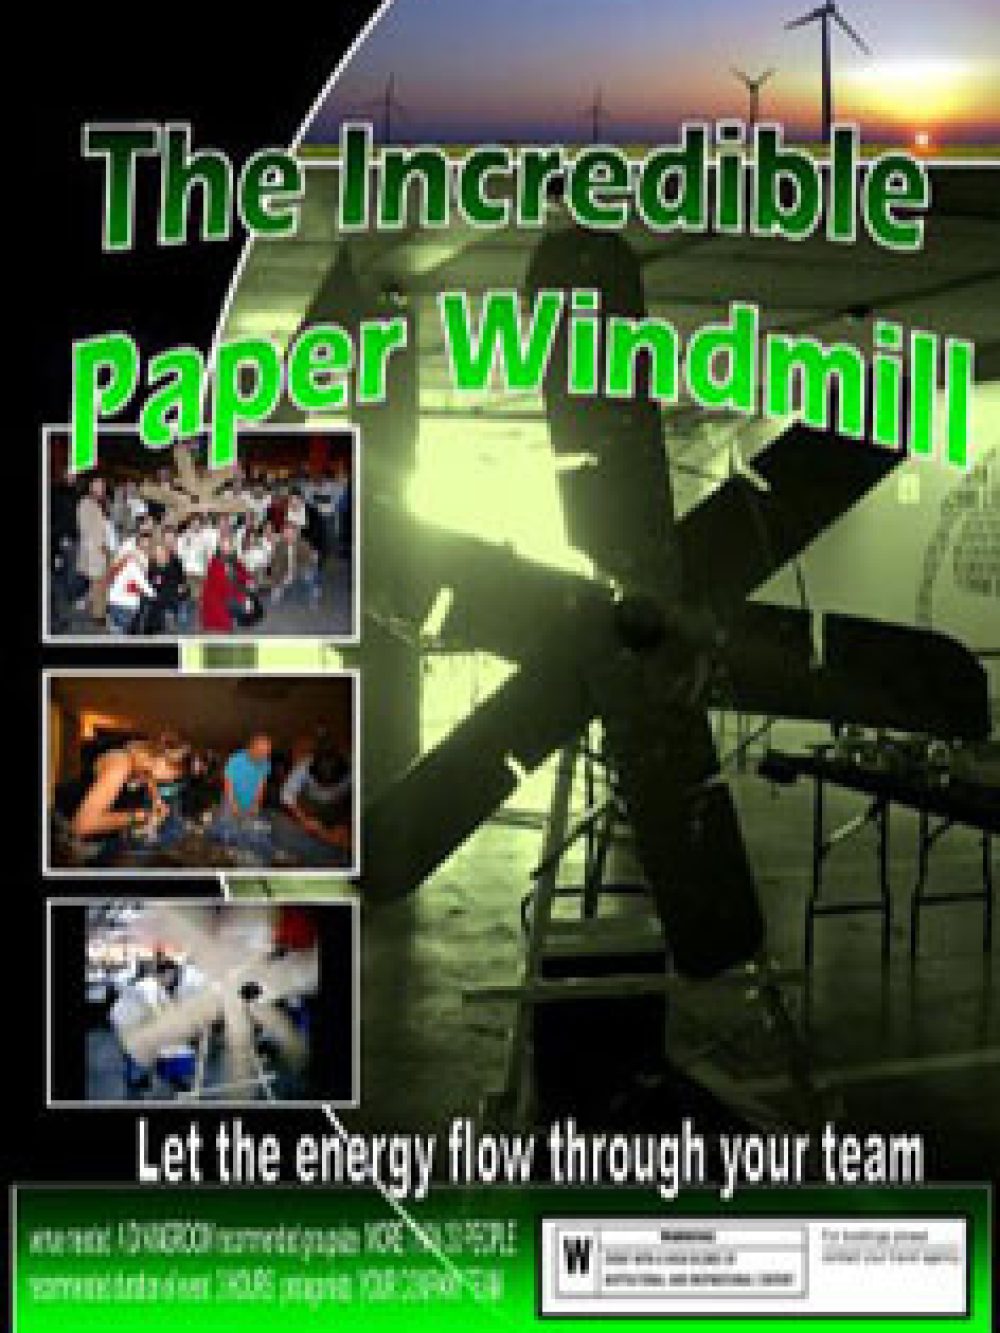 the_incredible_paper_windmill_vertical_web